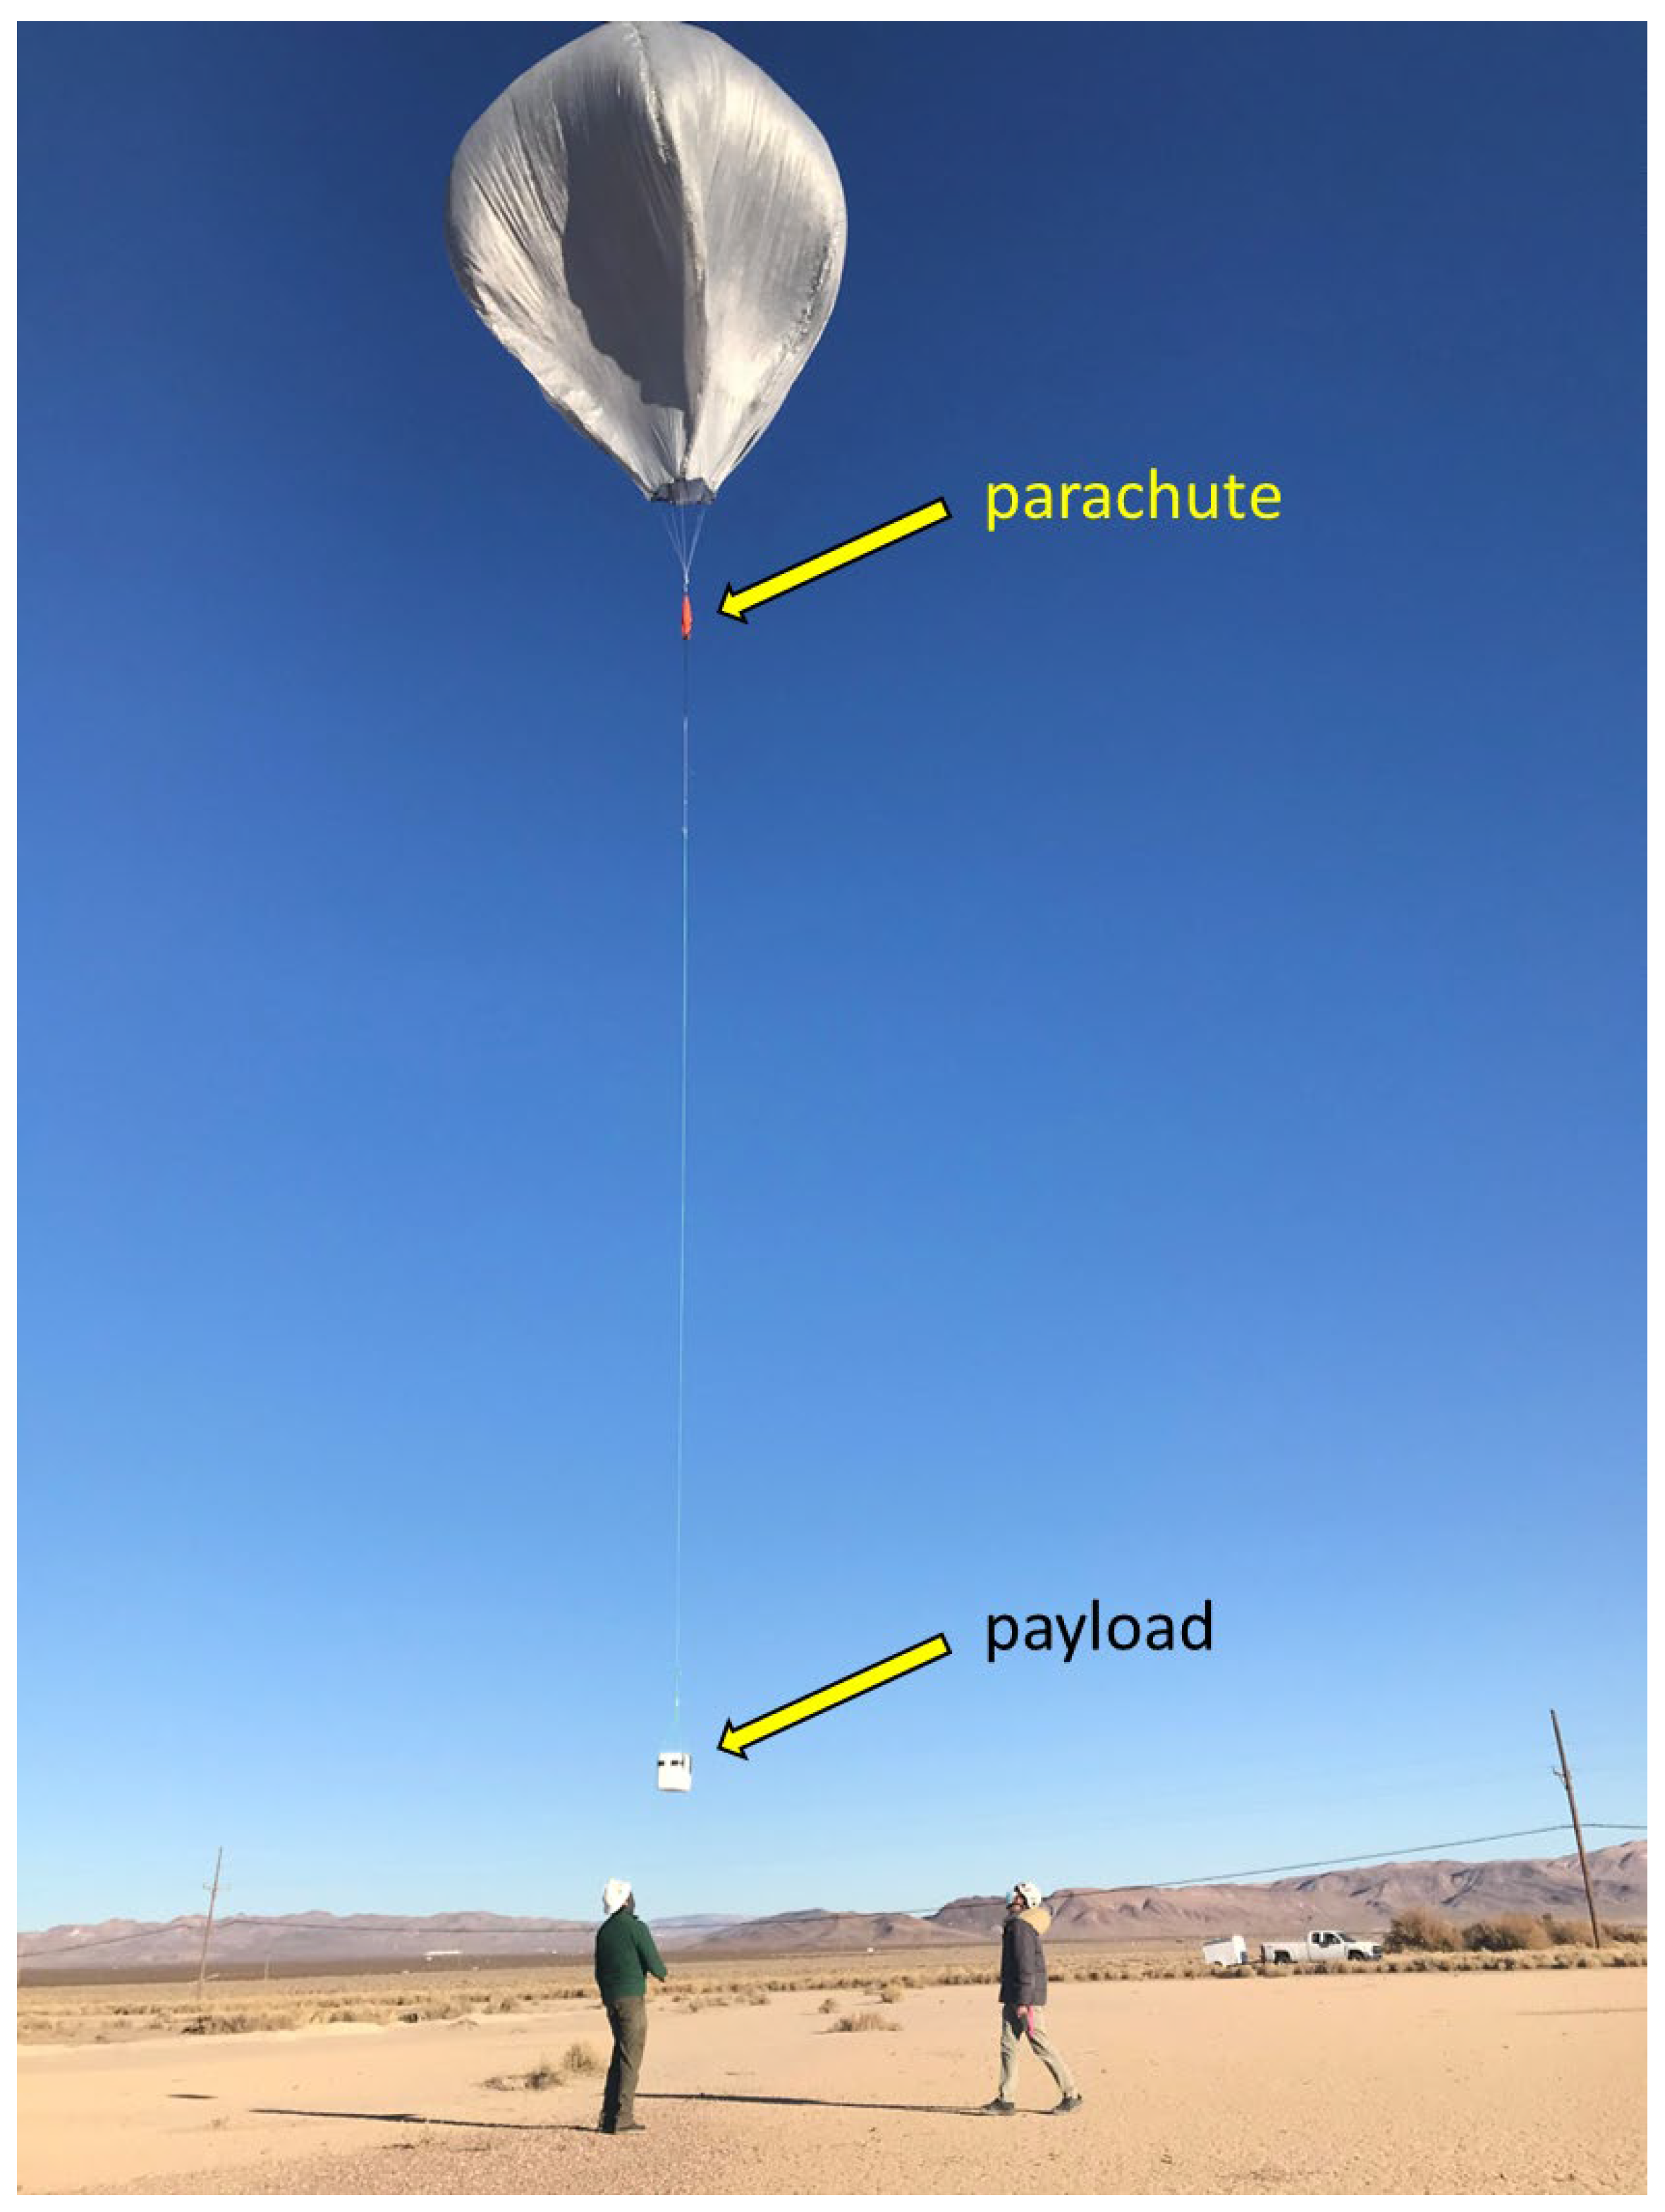 Remote Sensing | Free Full-Text | Detection of the Large Surface Explosion  Coupling Experiment by a Sparse Network of Balloon-Borne Infrasound Sensors